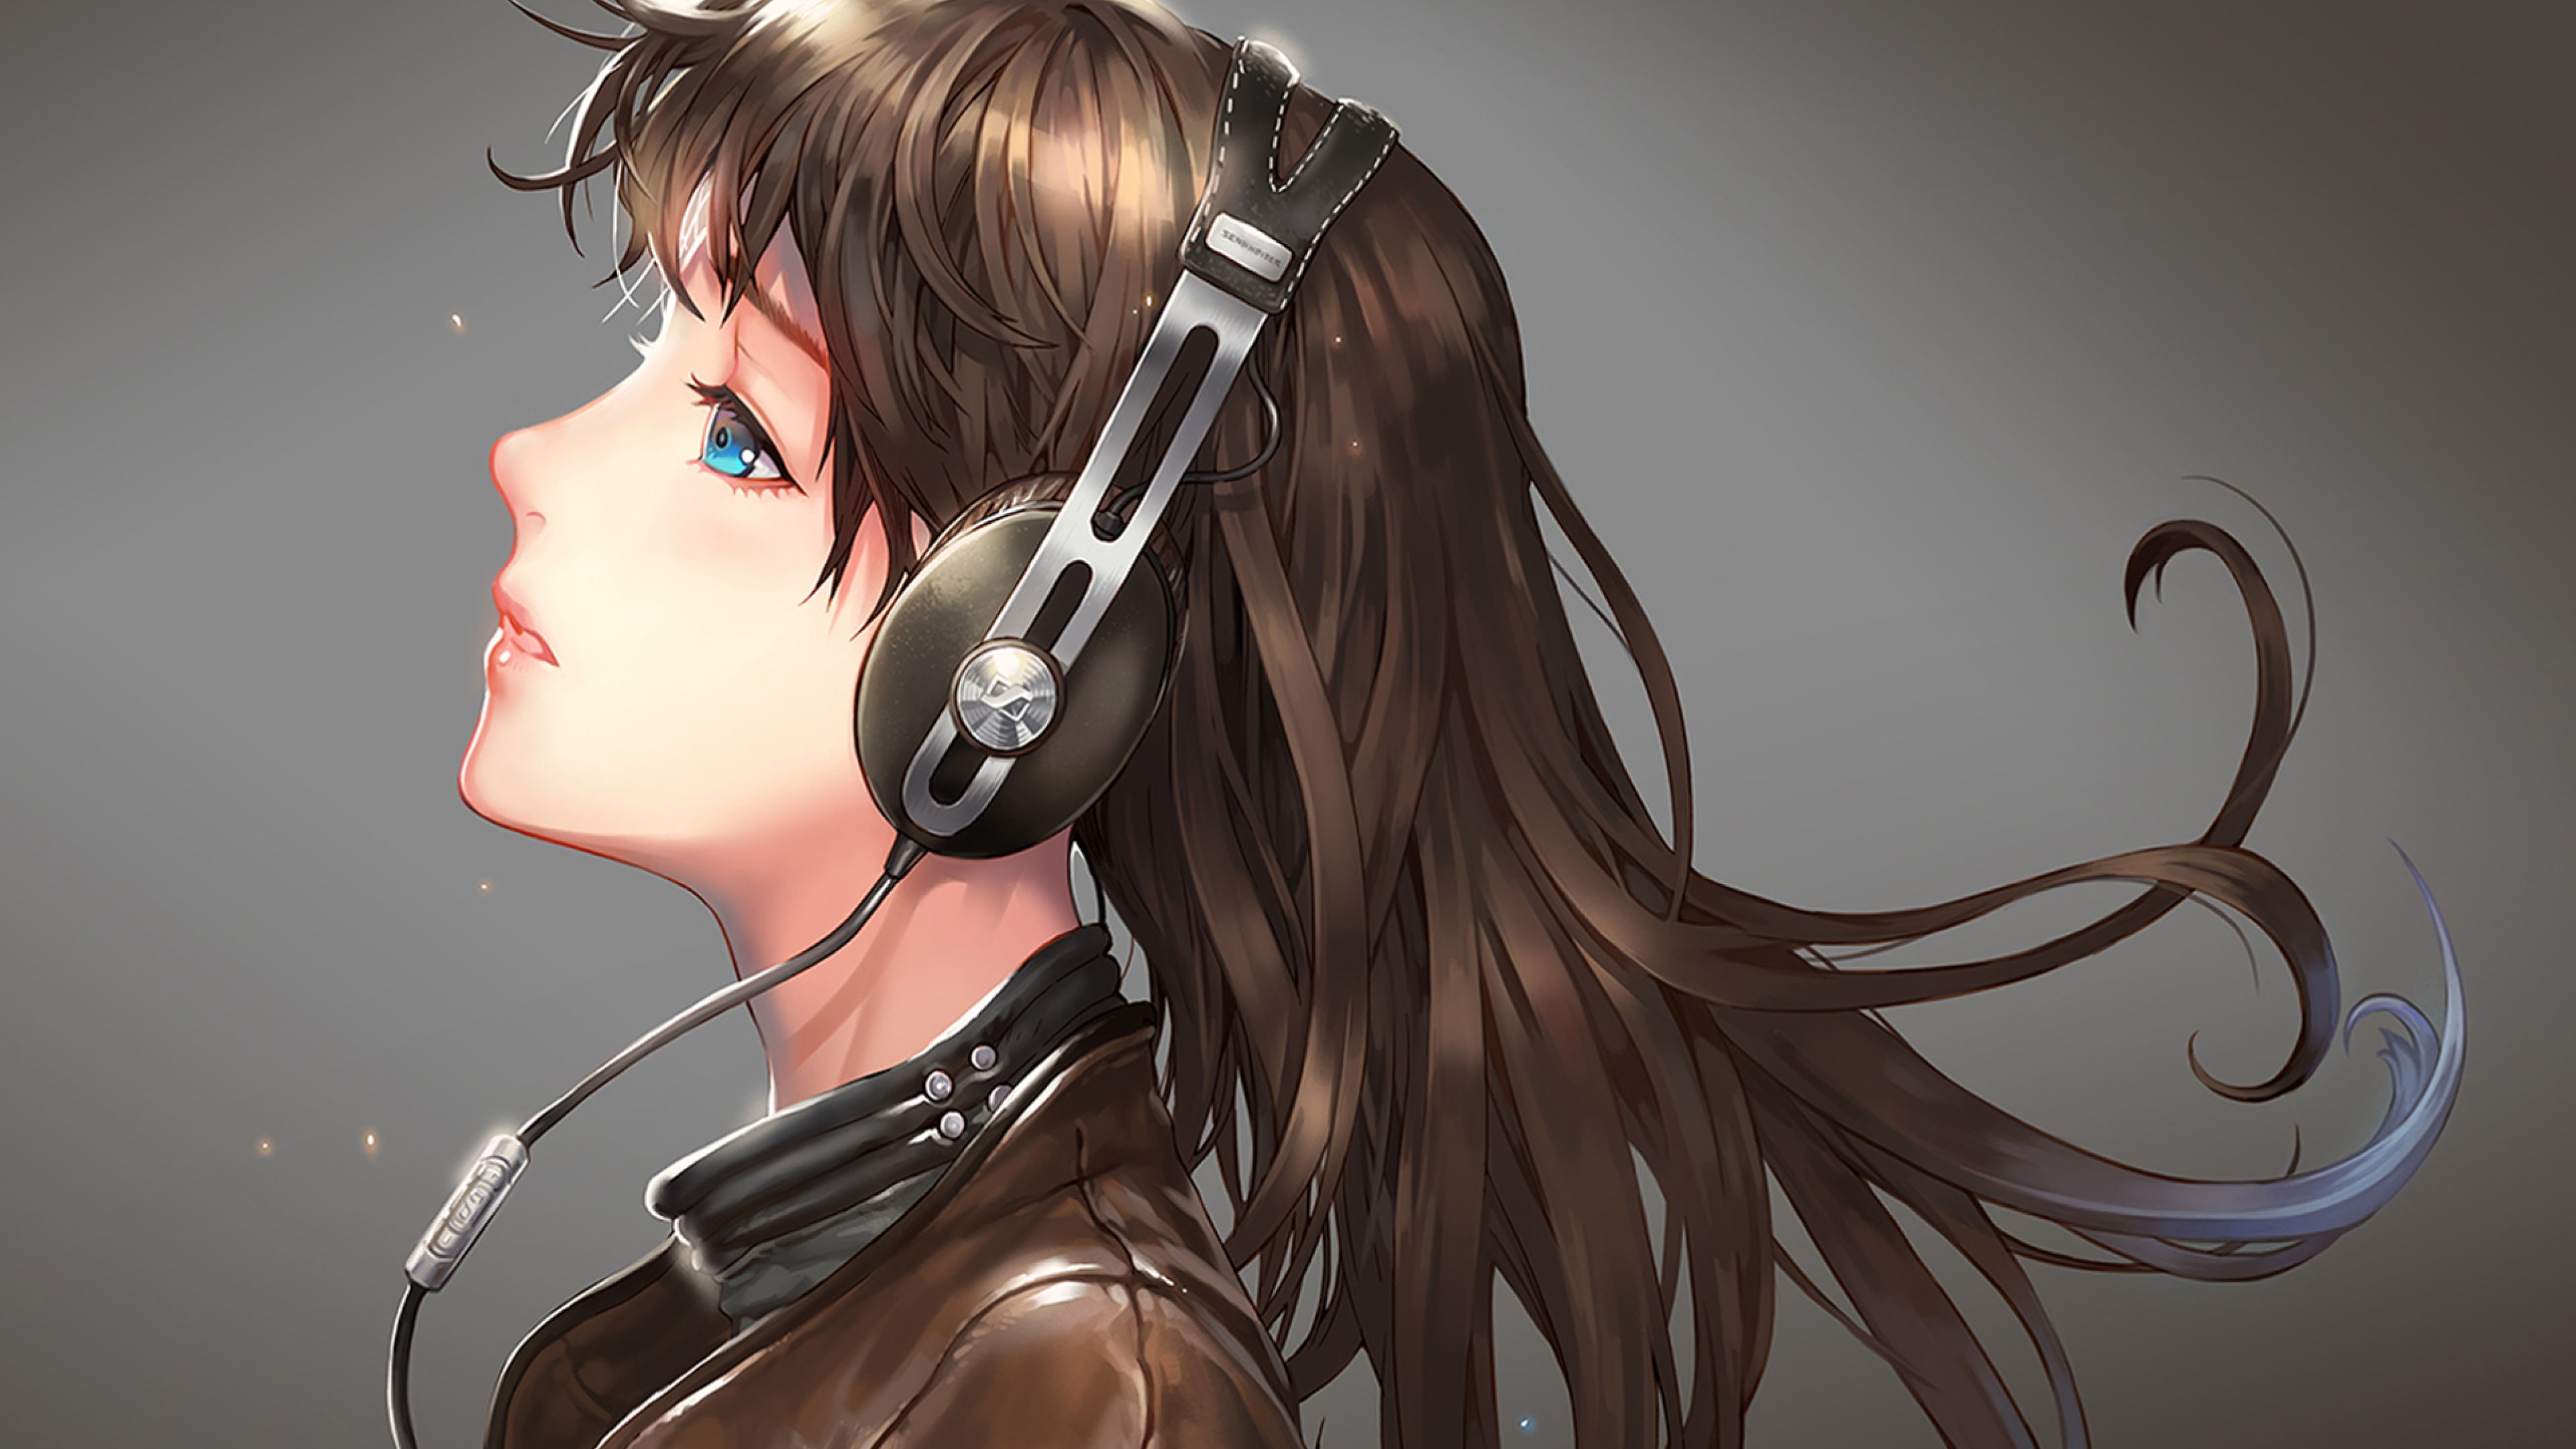 3840x2160 girl, headphones, profile 4K Wallpaper, HD Anime 4K Wallpapers, Image, Photos and Backgrounds